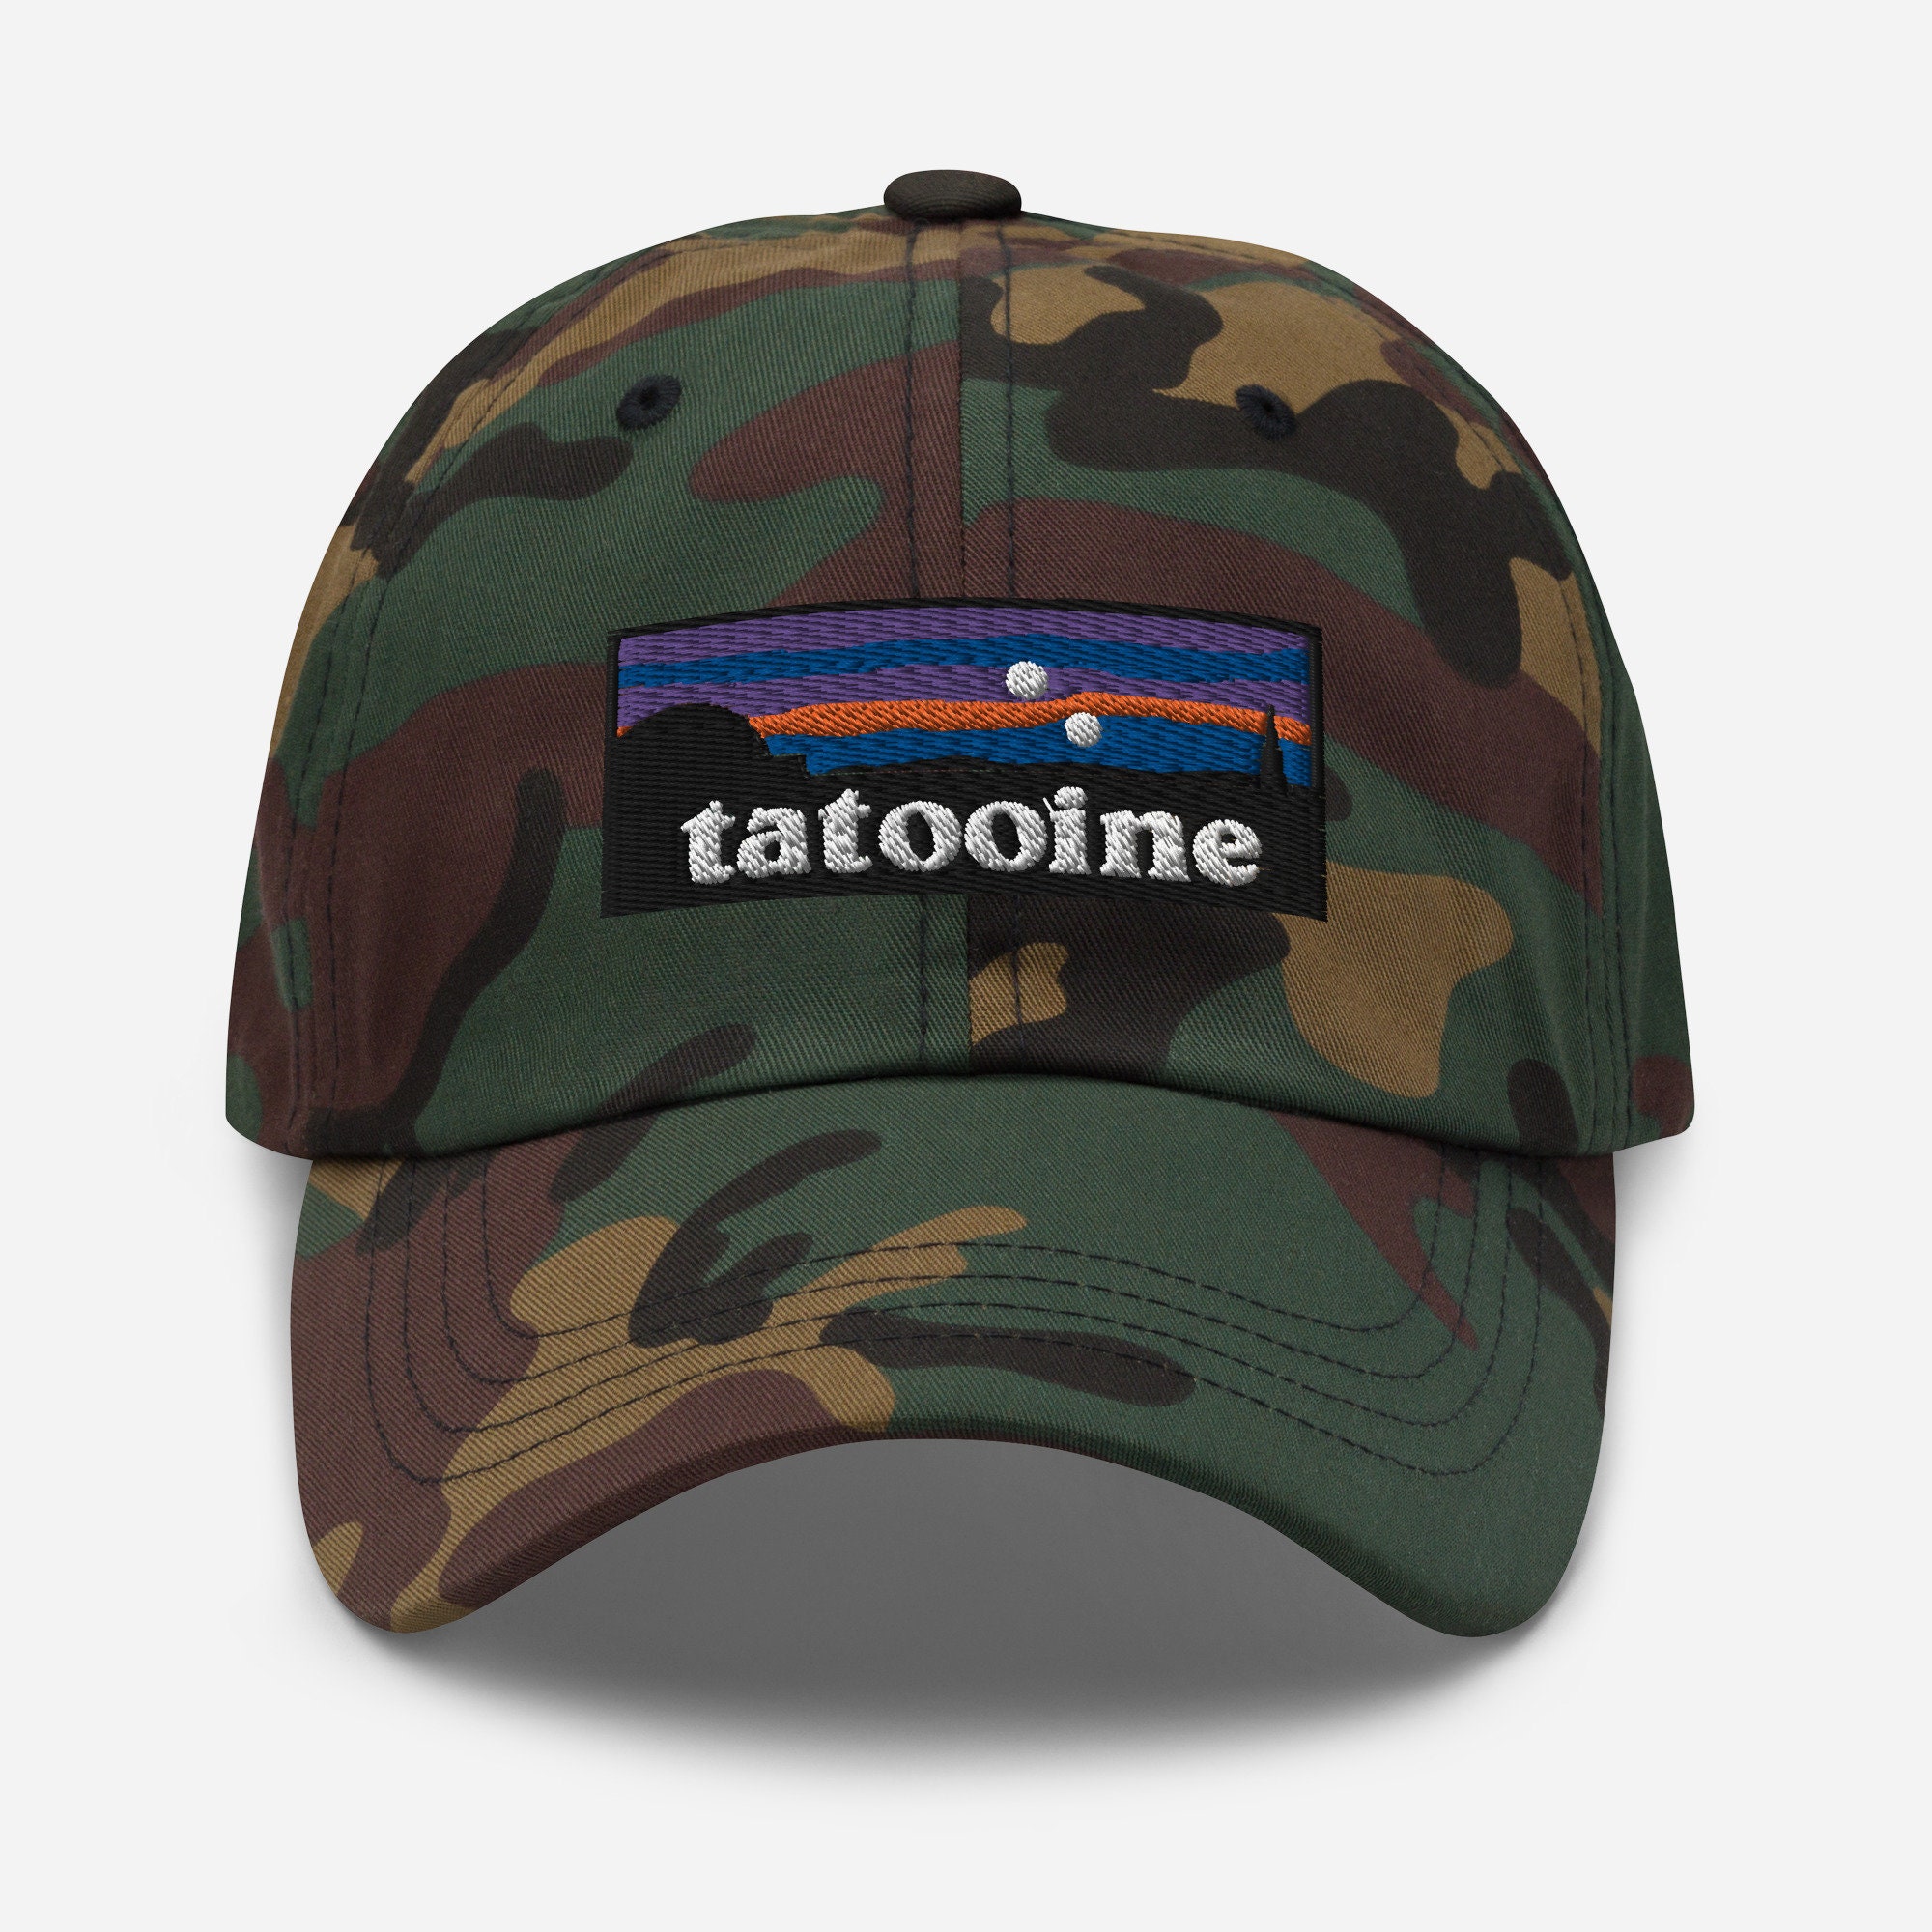 Tatooine Baseball Cap Father's Day Hat